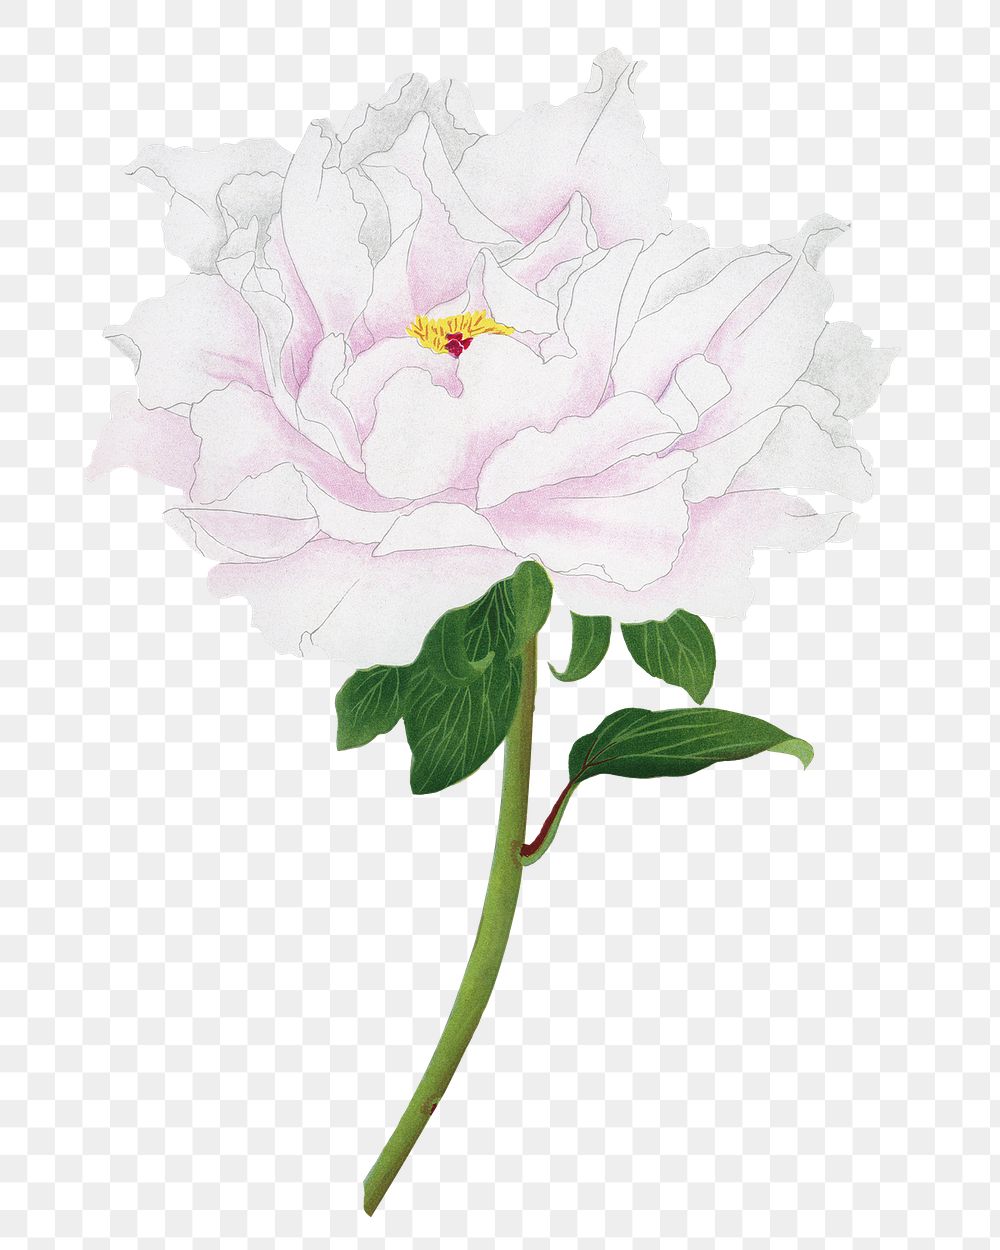 Aesthetic peony flower png sticker, floral clipart on transparent background